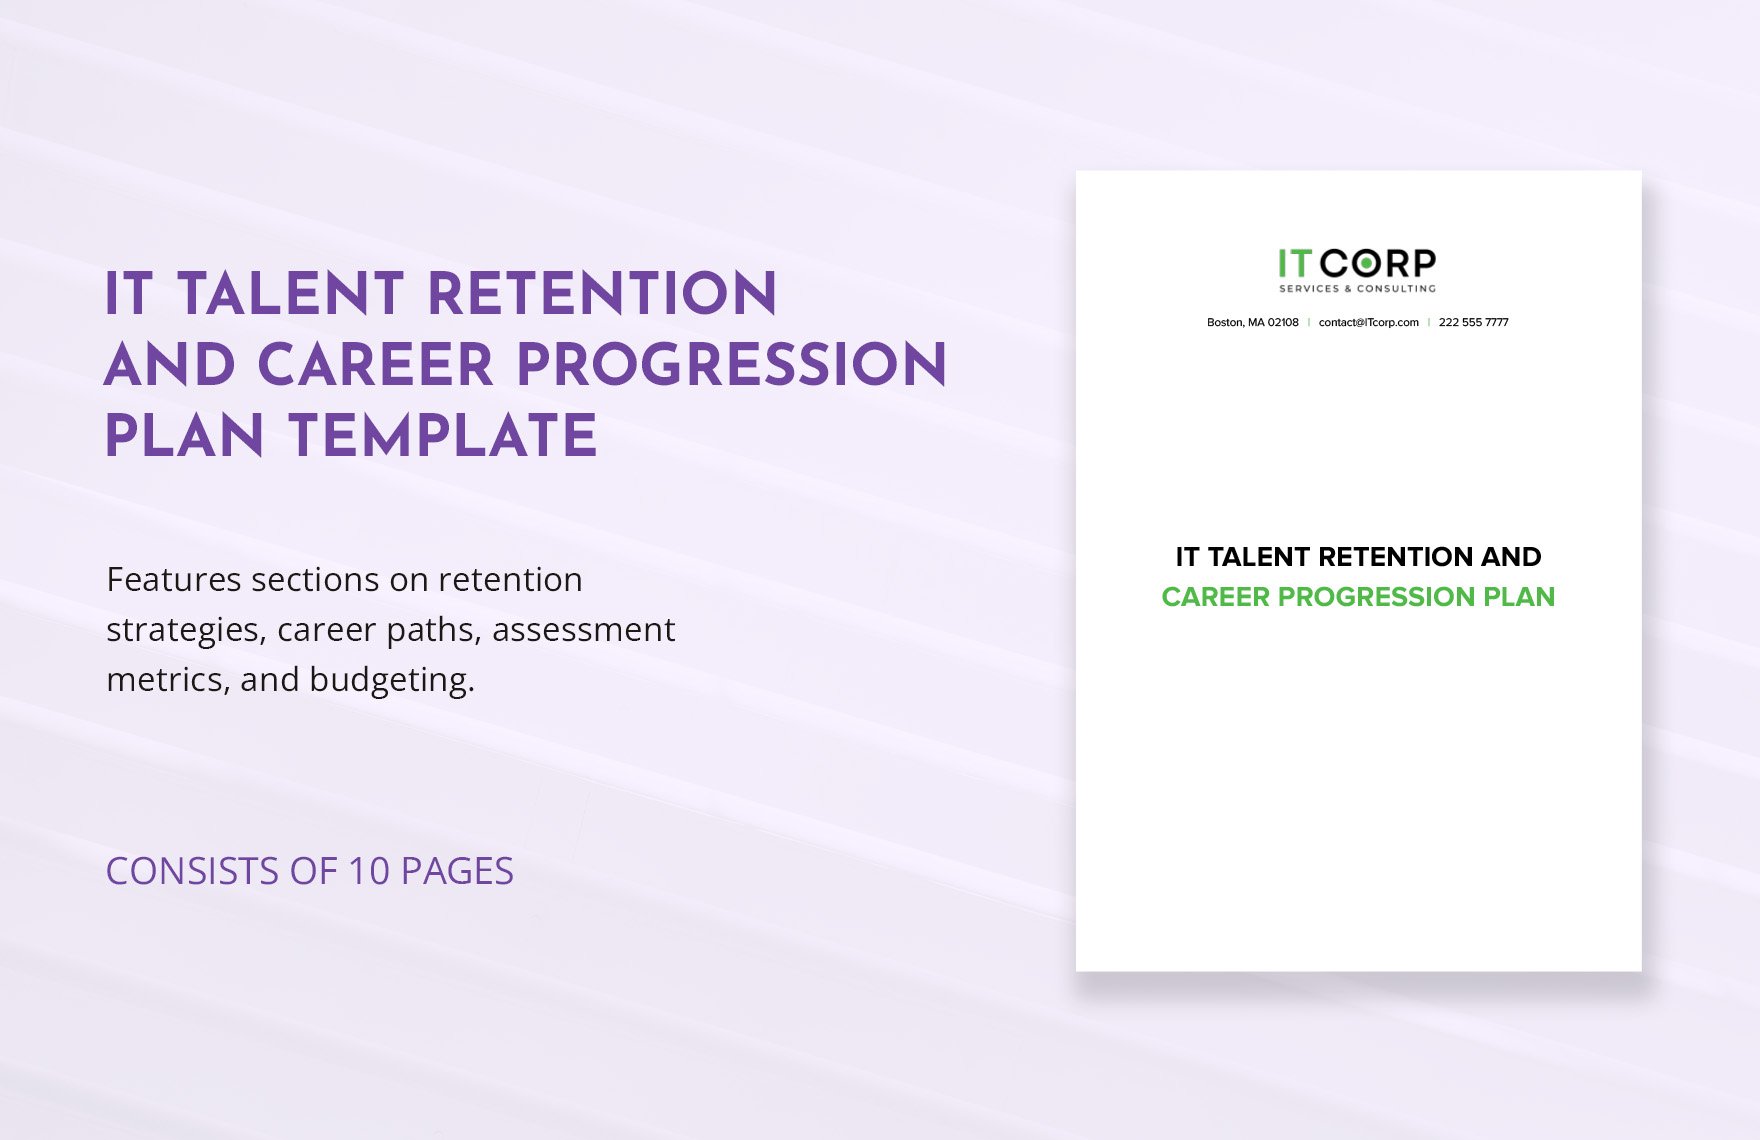 IT Talent Retention and Career Progression Plan Template